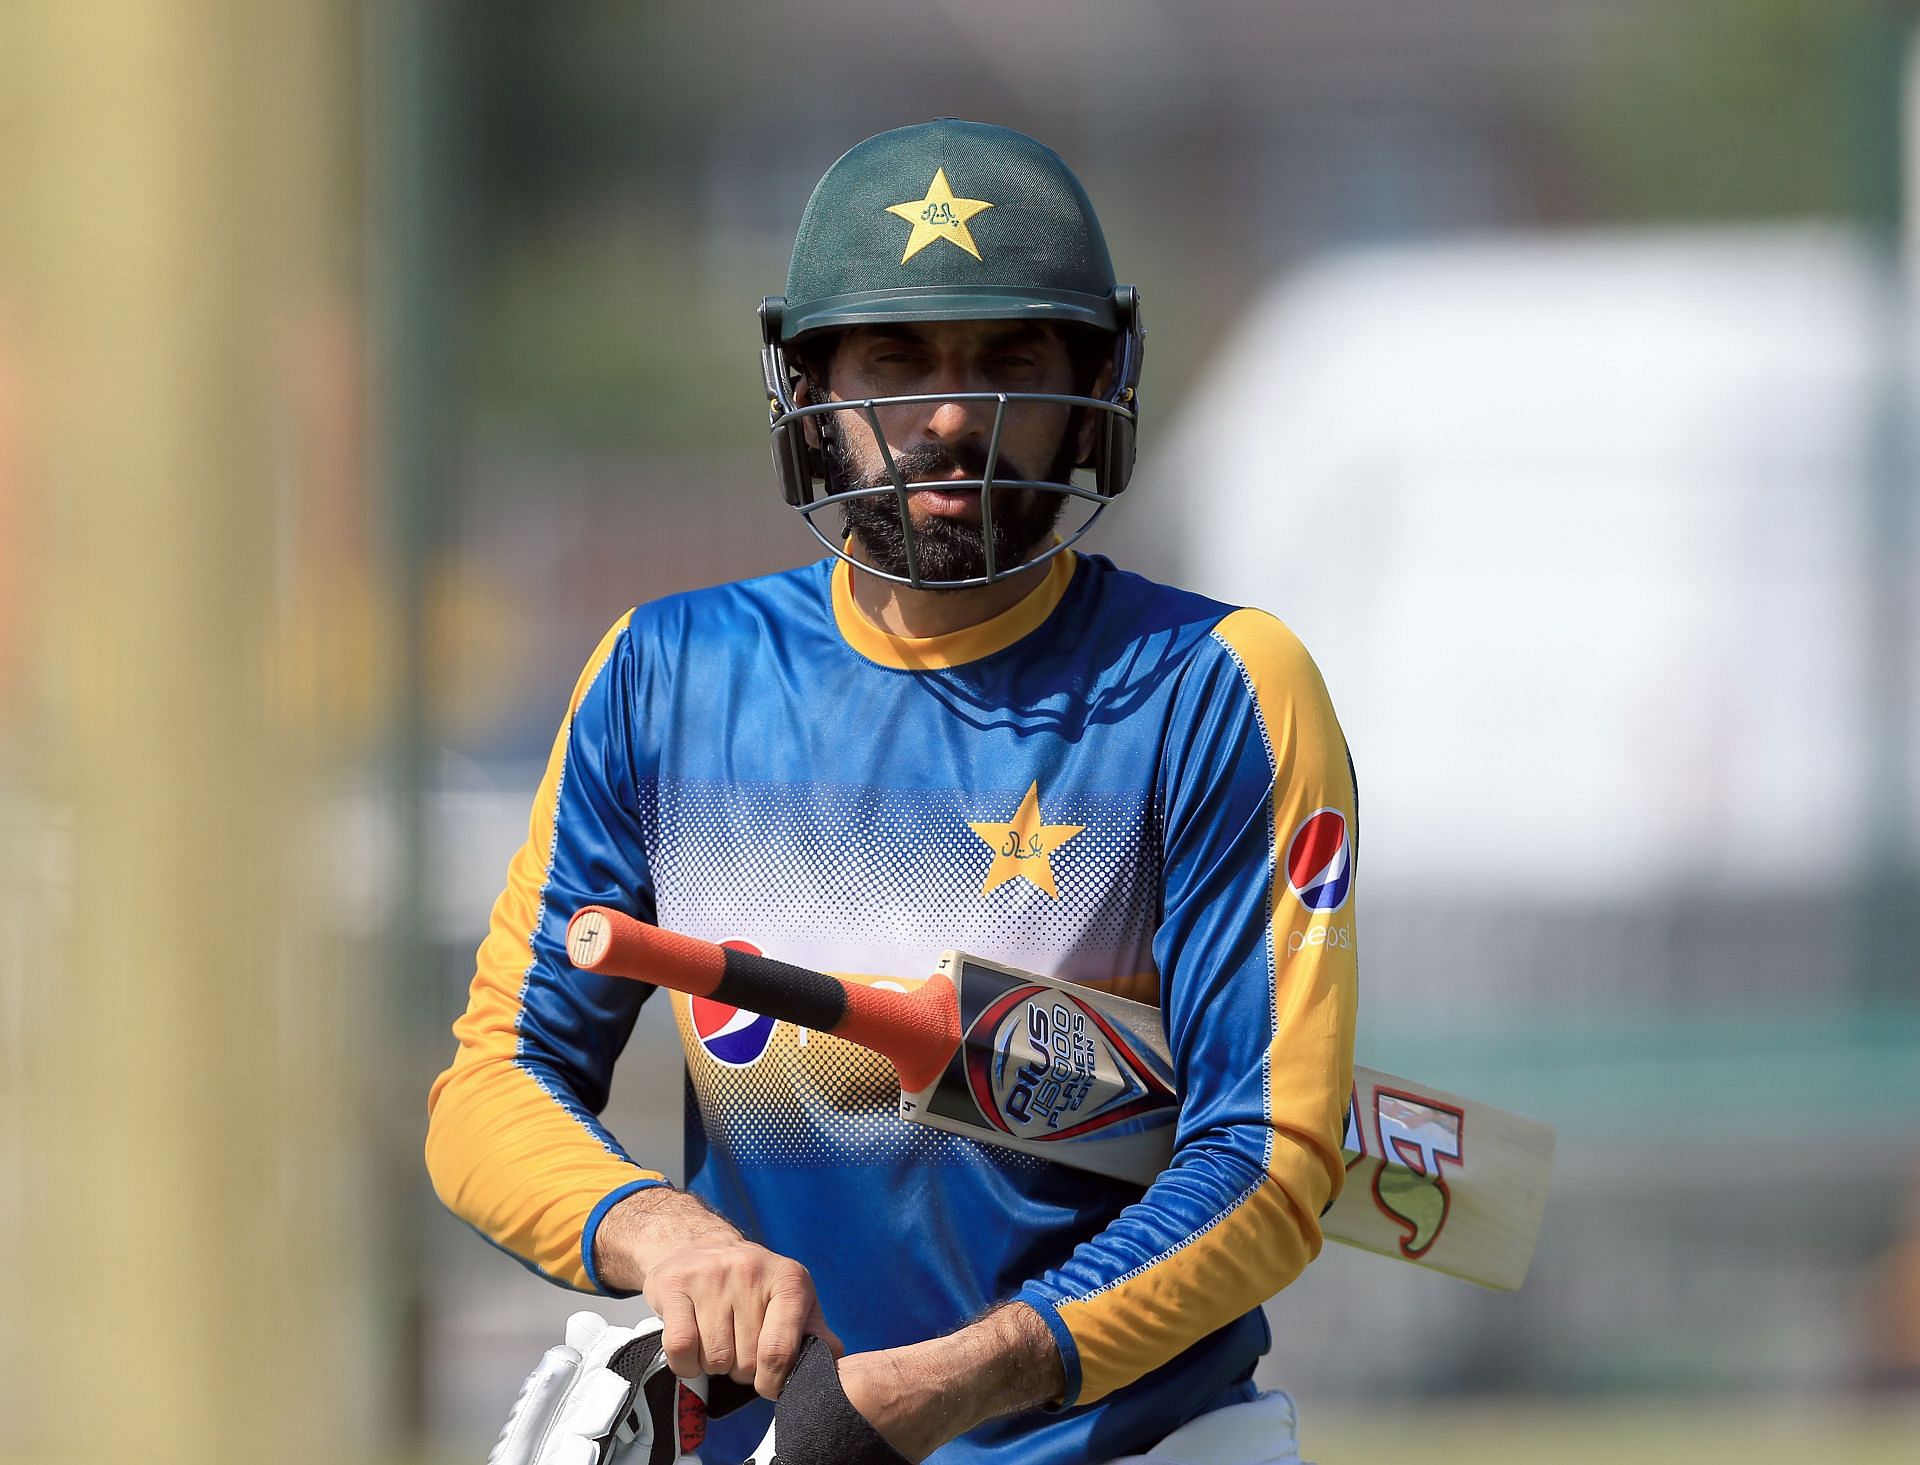 While he has 10 Test tons to his name, Misbah-ul-Haq never managed to score one in ODIs.